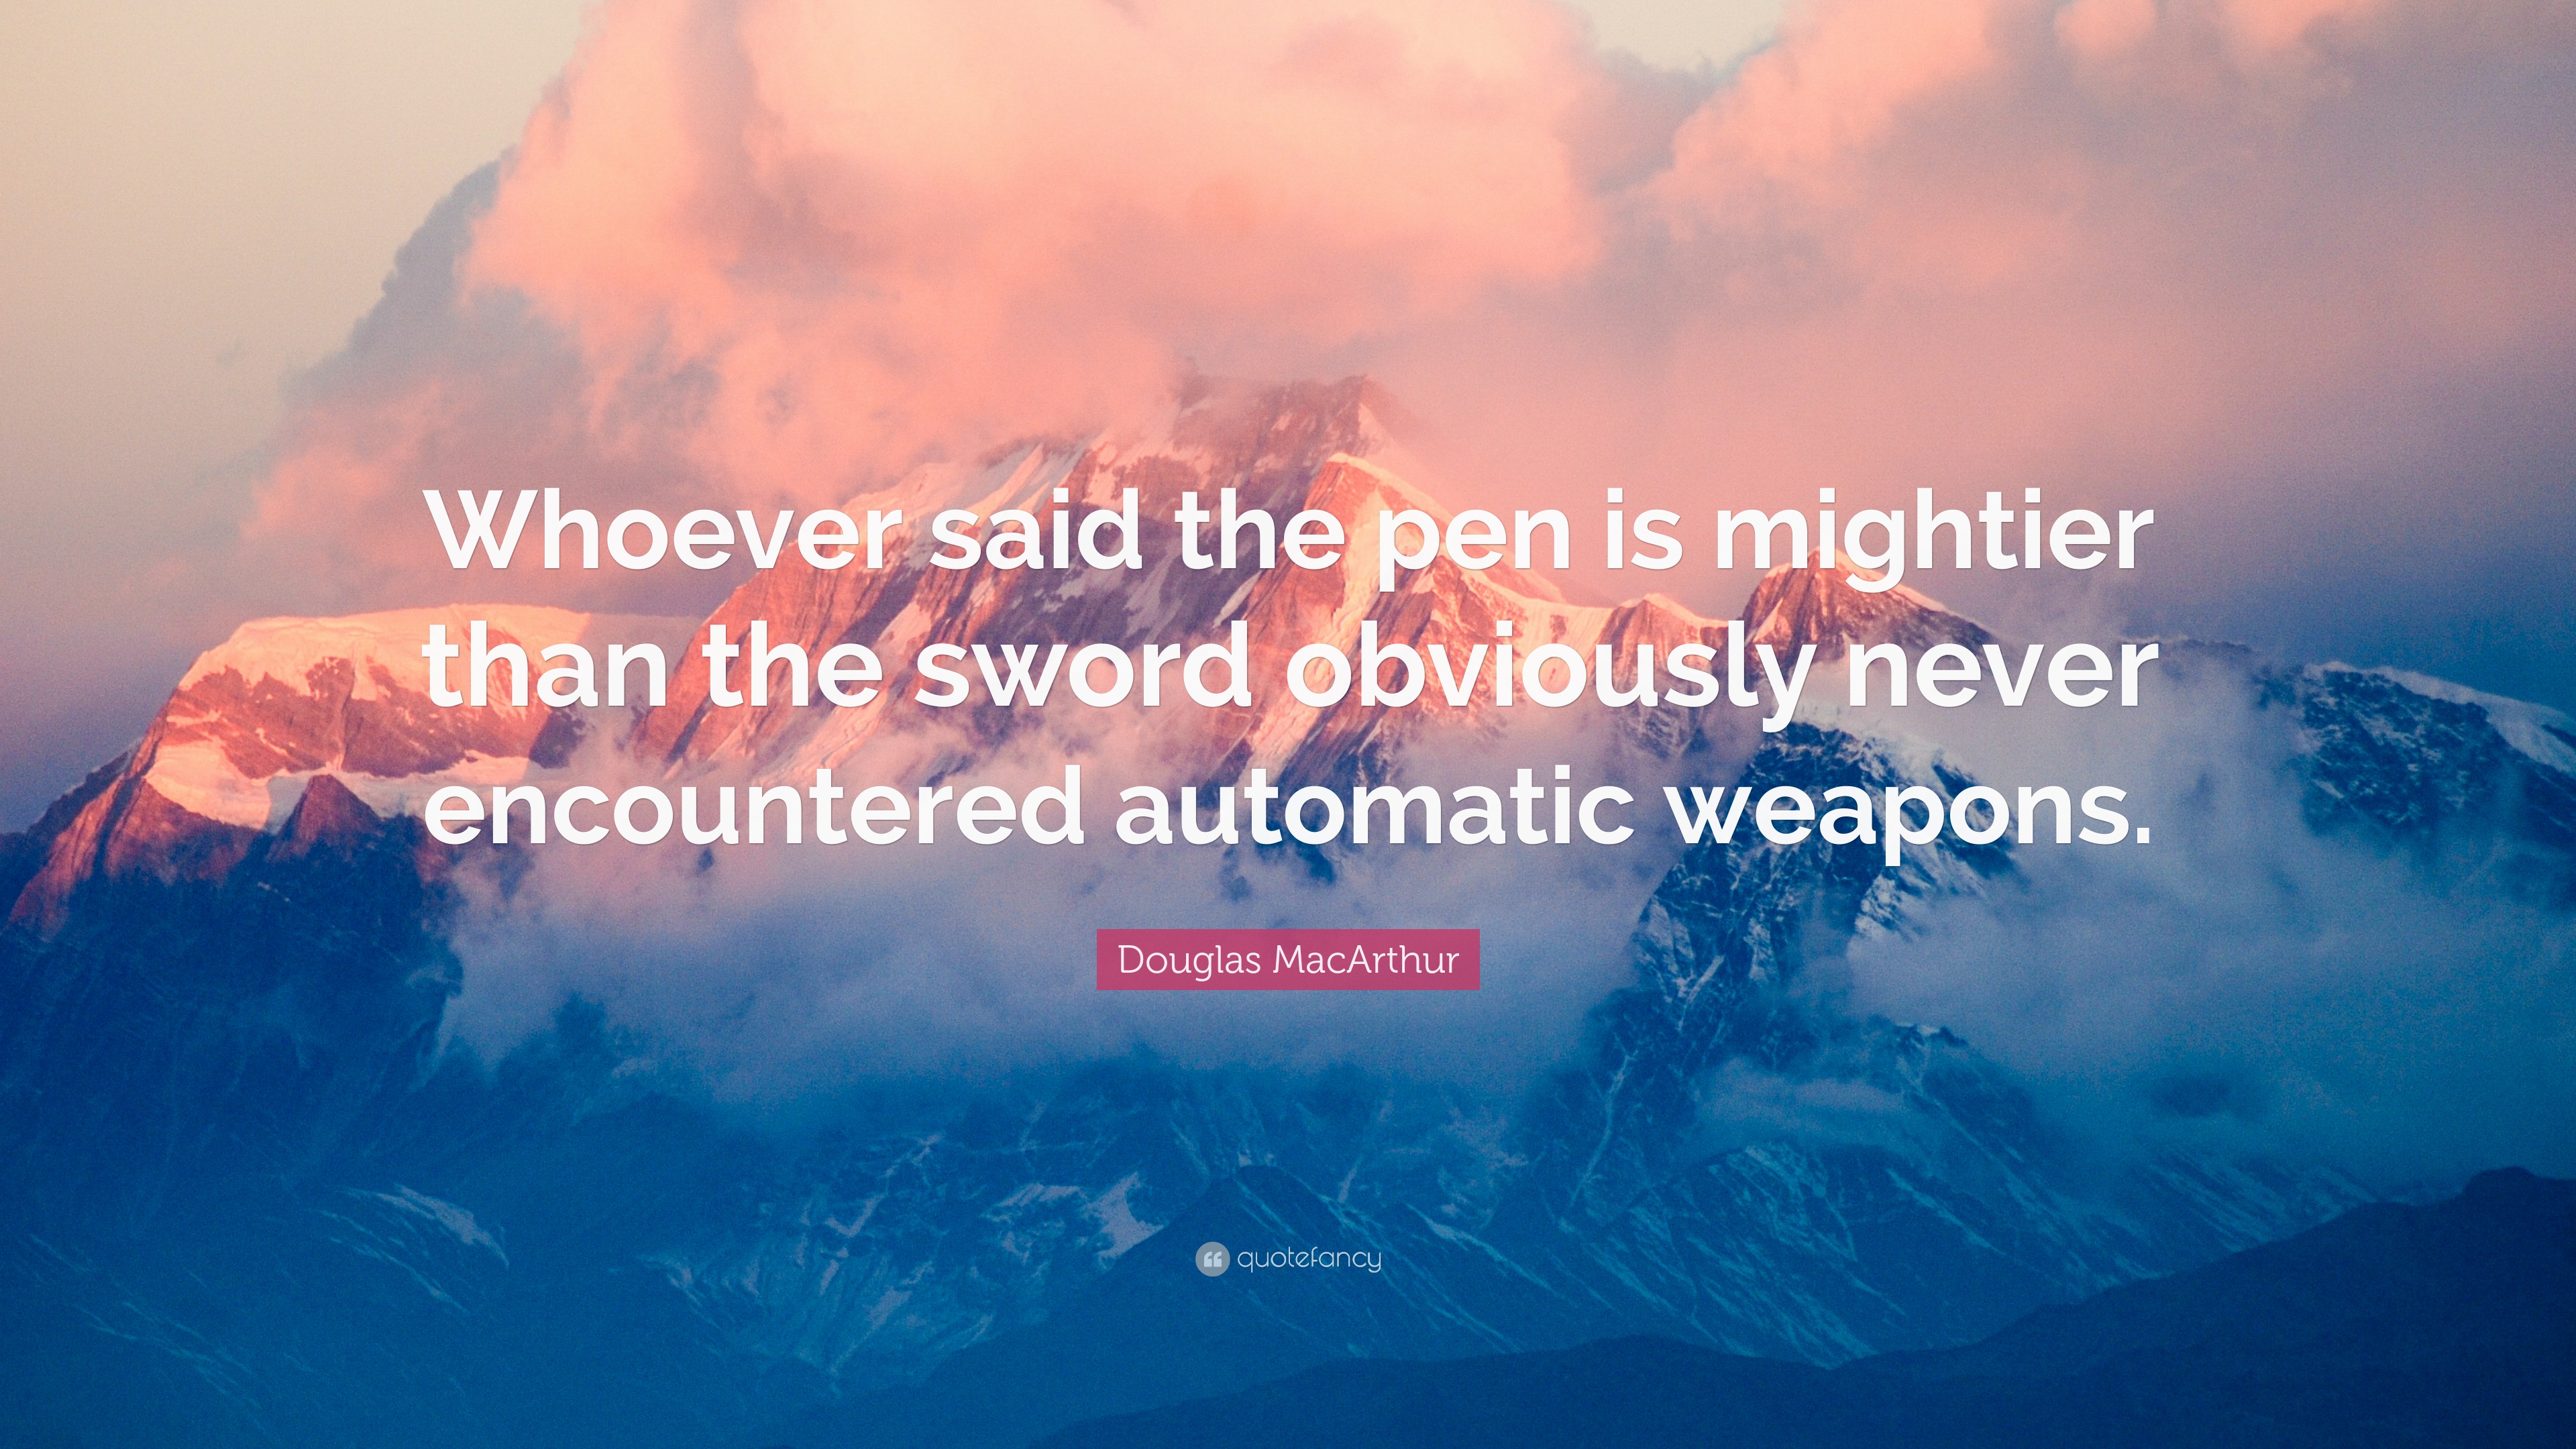 Douglas MacArthur Quote: “Whoever said the pen is mightier than the ...